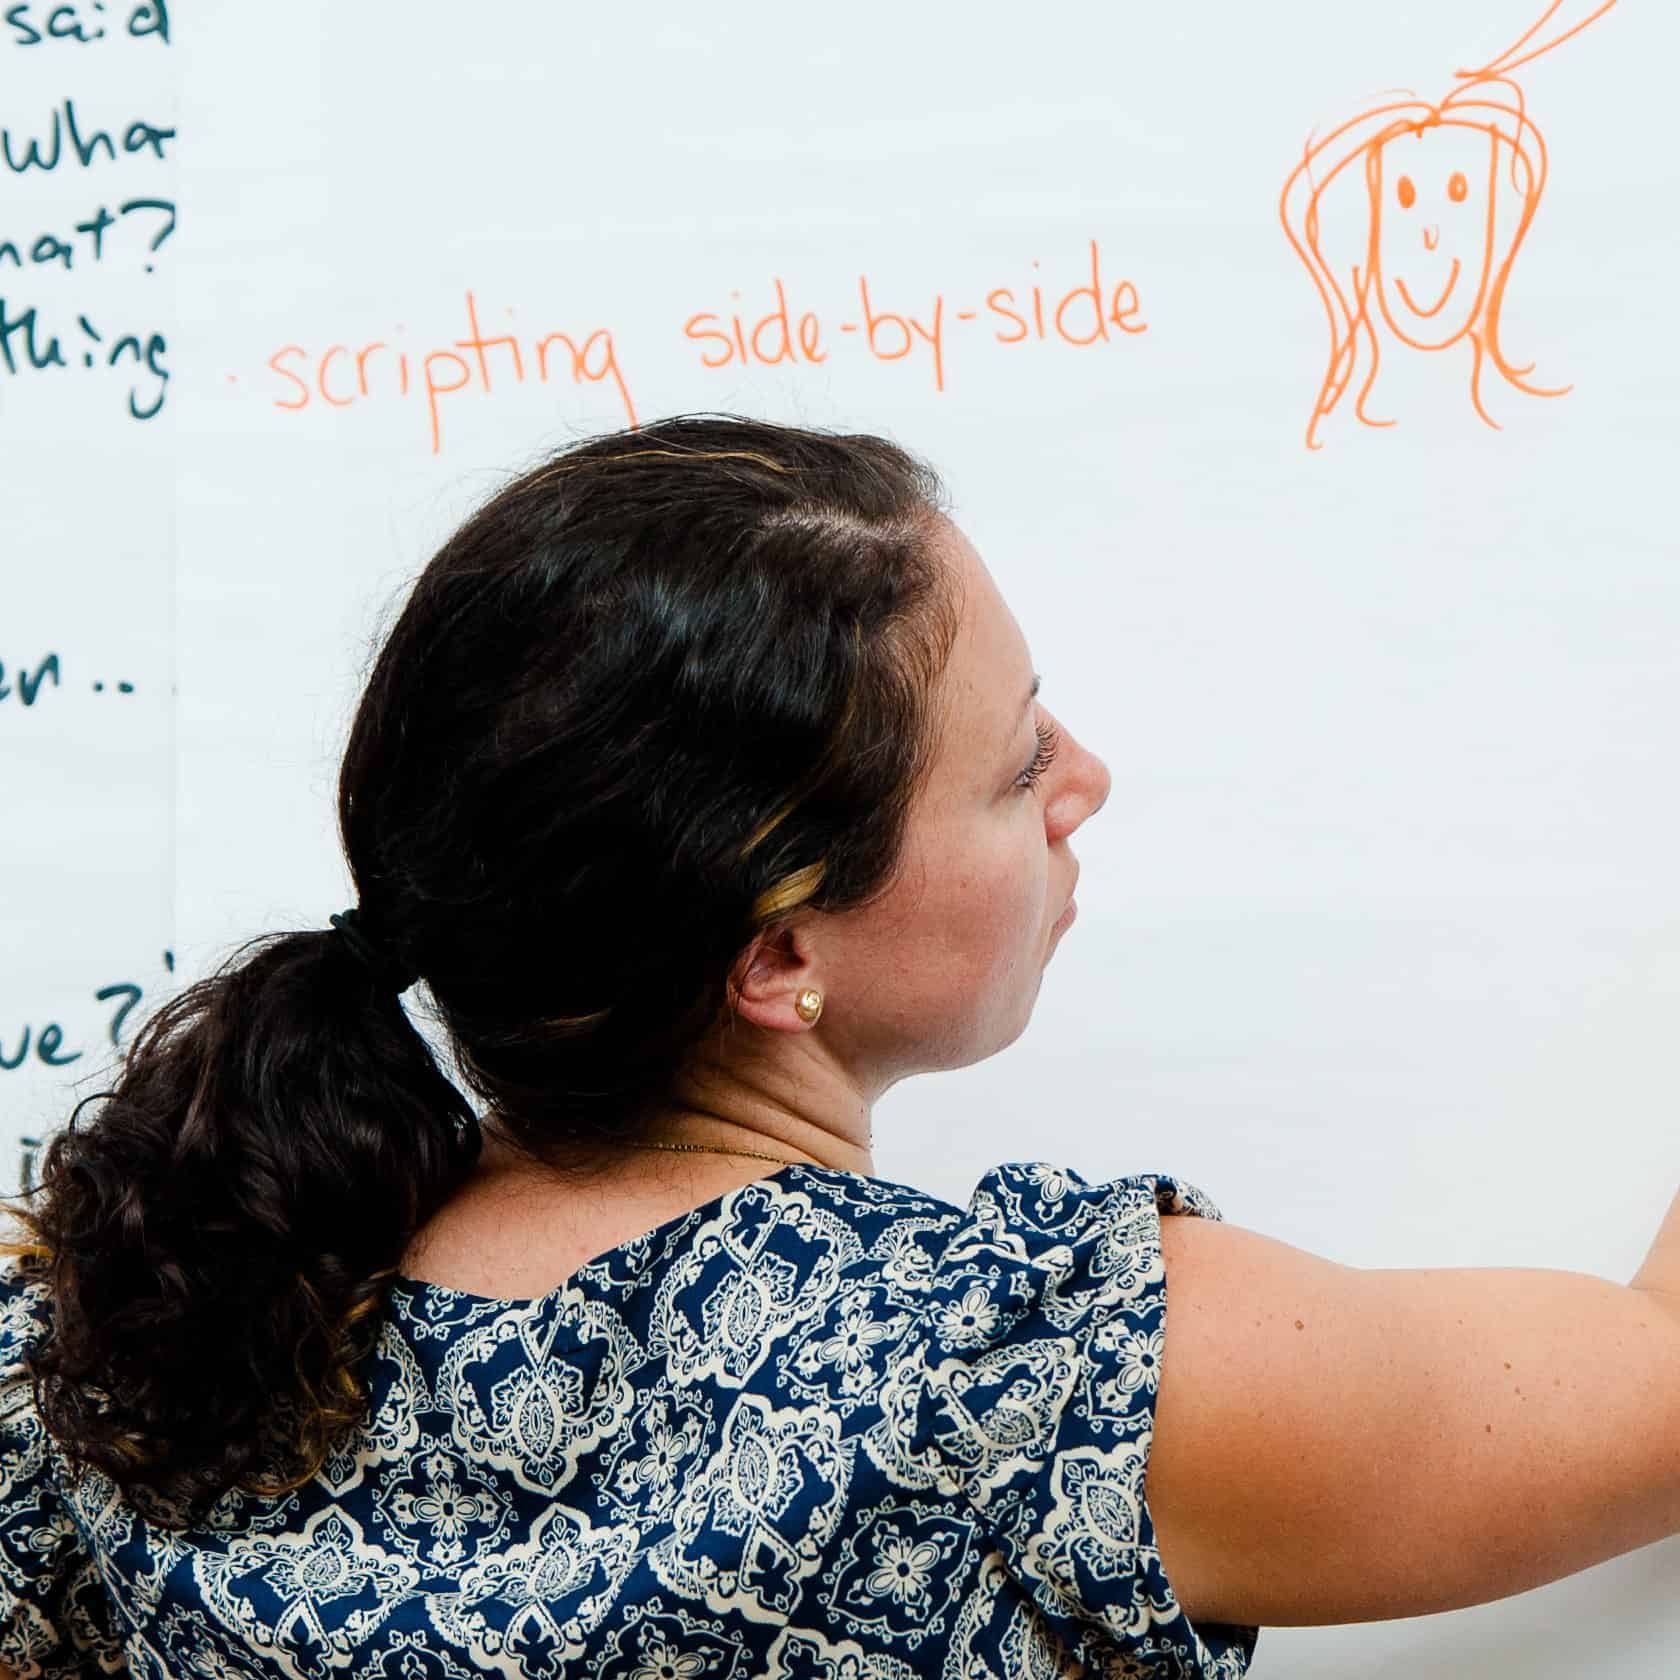 A LEAP participant writes on a whiteboard